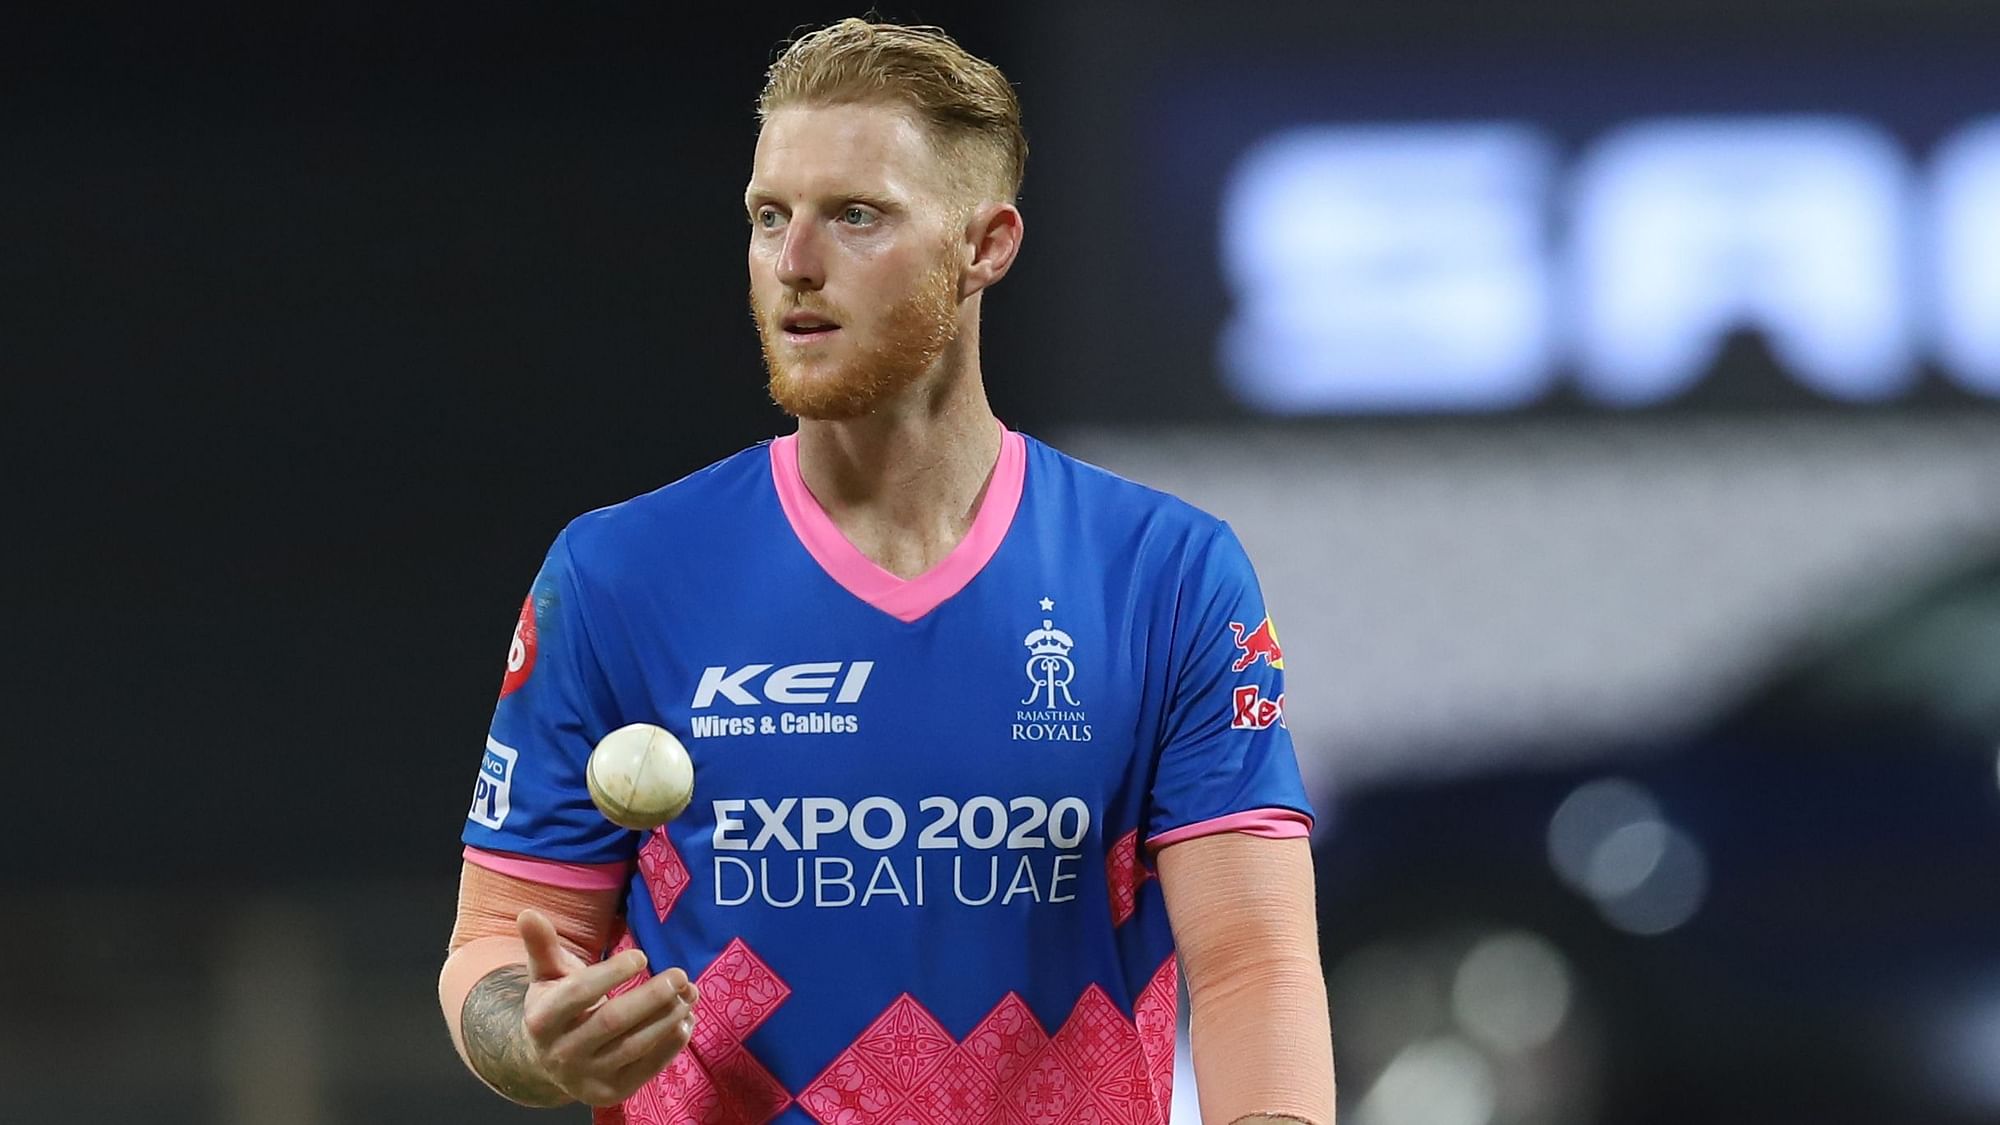 Ben Stokes suffered an injury in the opening game for Rajasthan Royals in IPL 2021 against Punjab Kings.